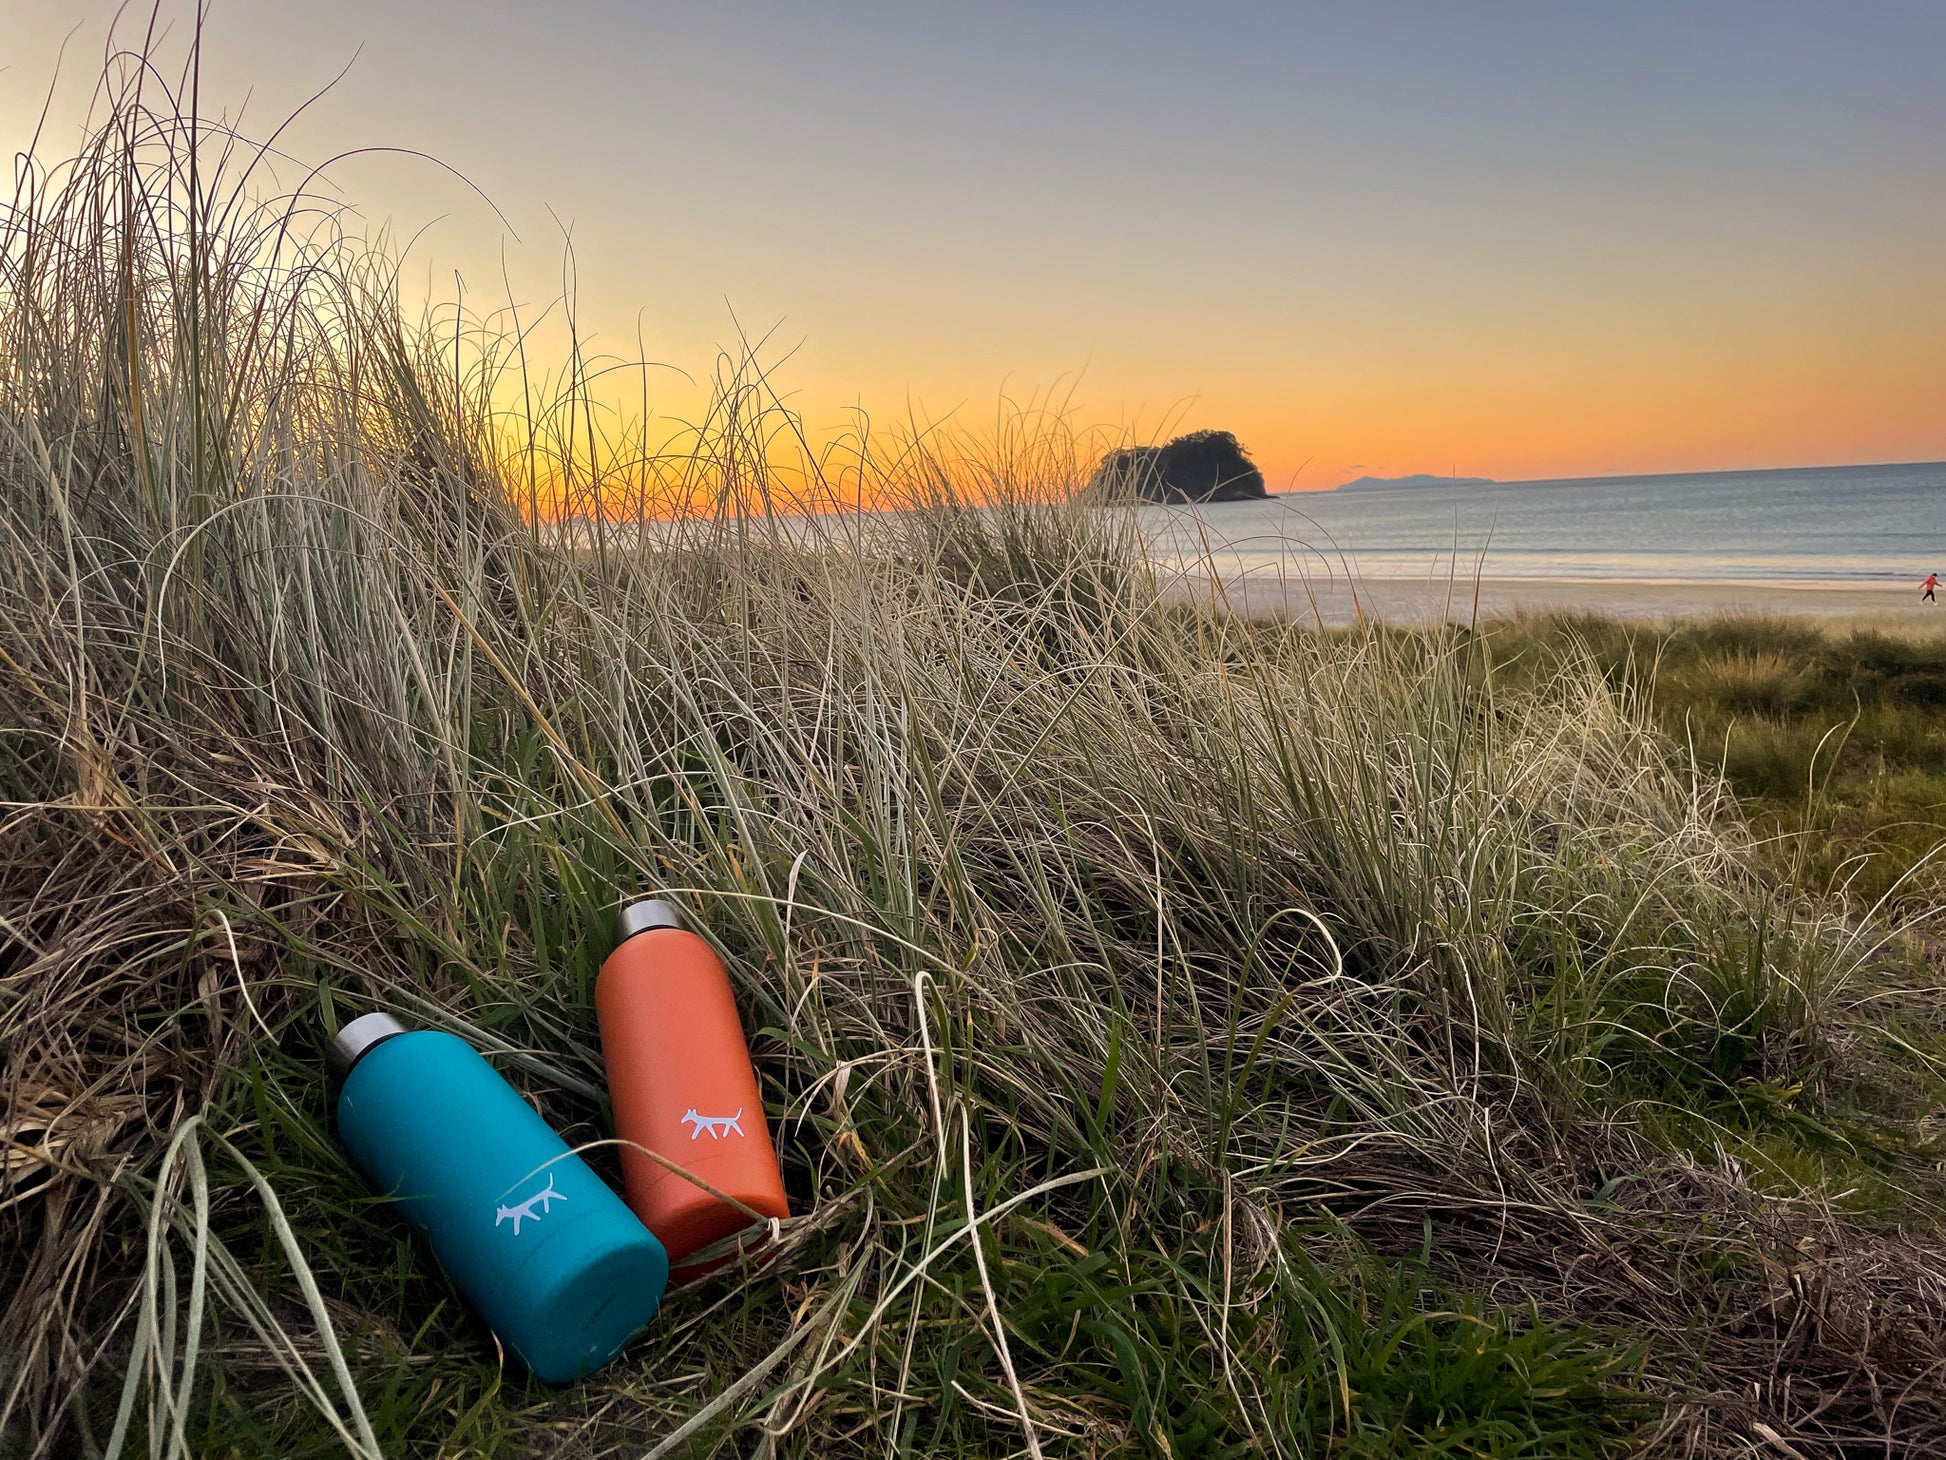 Stainless steel water bottles in lake and rust colour with cream Droggo logo on the front beside each other laying down on the grass. Beachy sunset background.